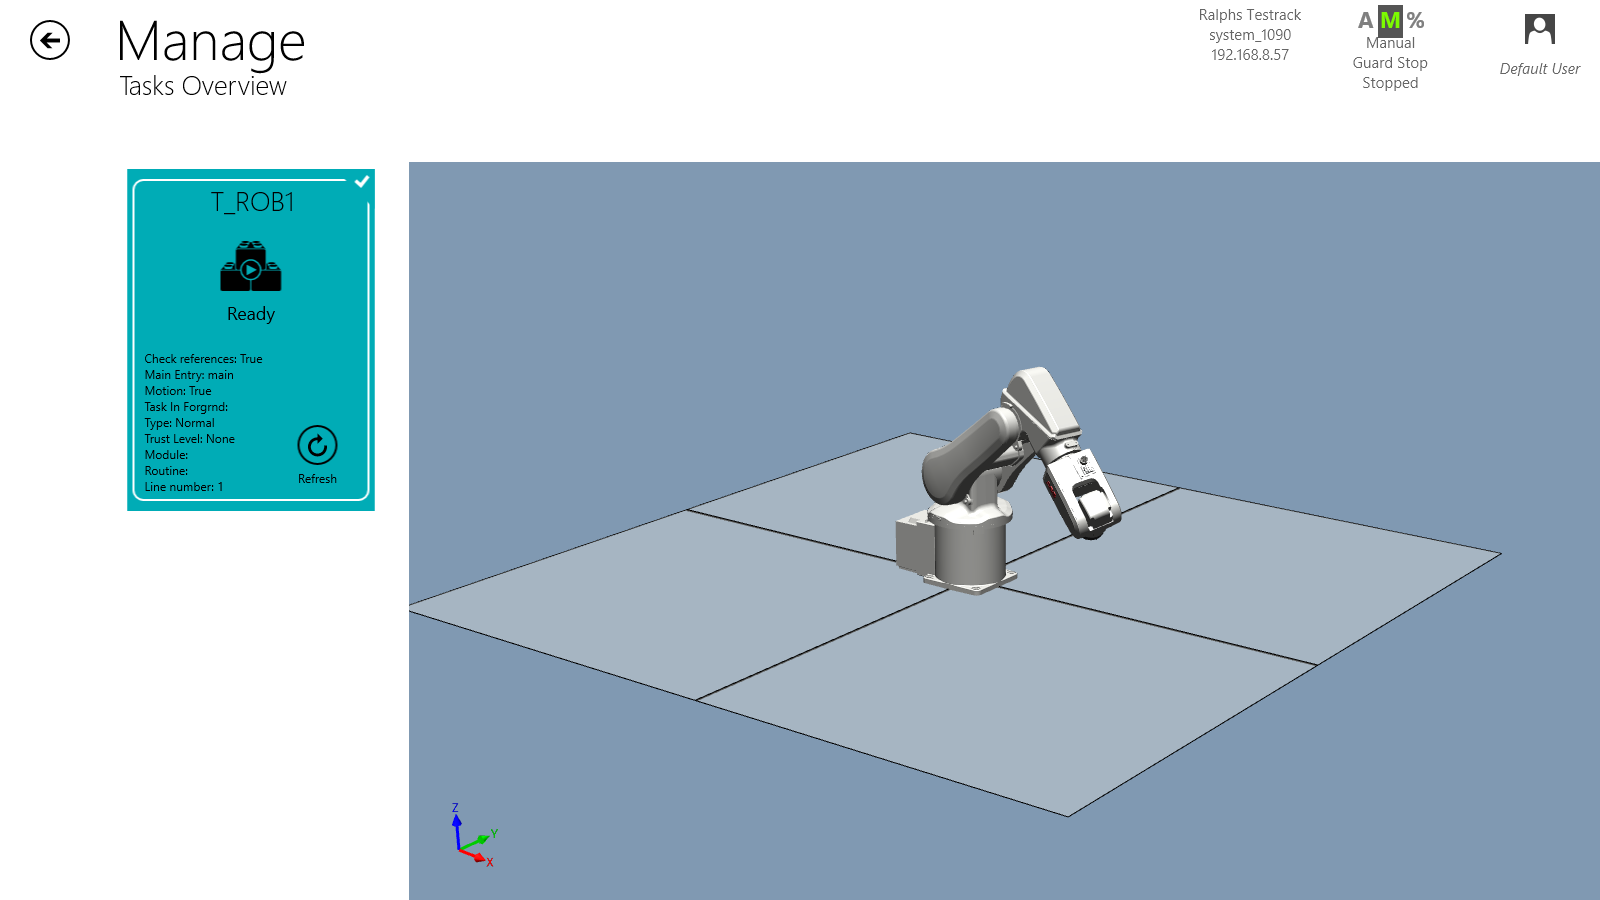 This is the task panel view with the 3D animation of the attached mechanical unit.